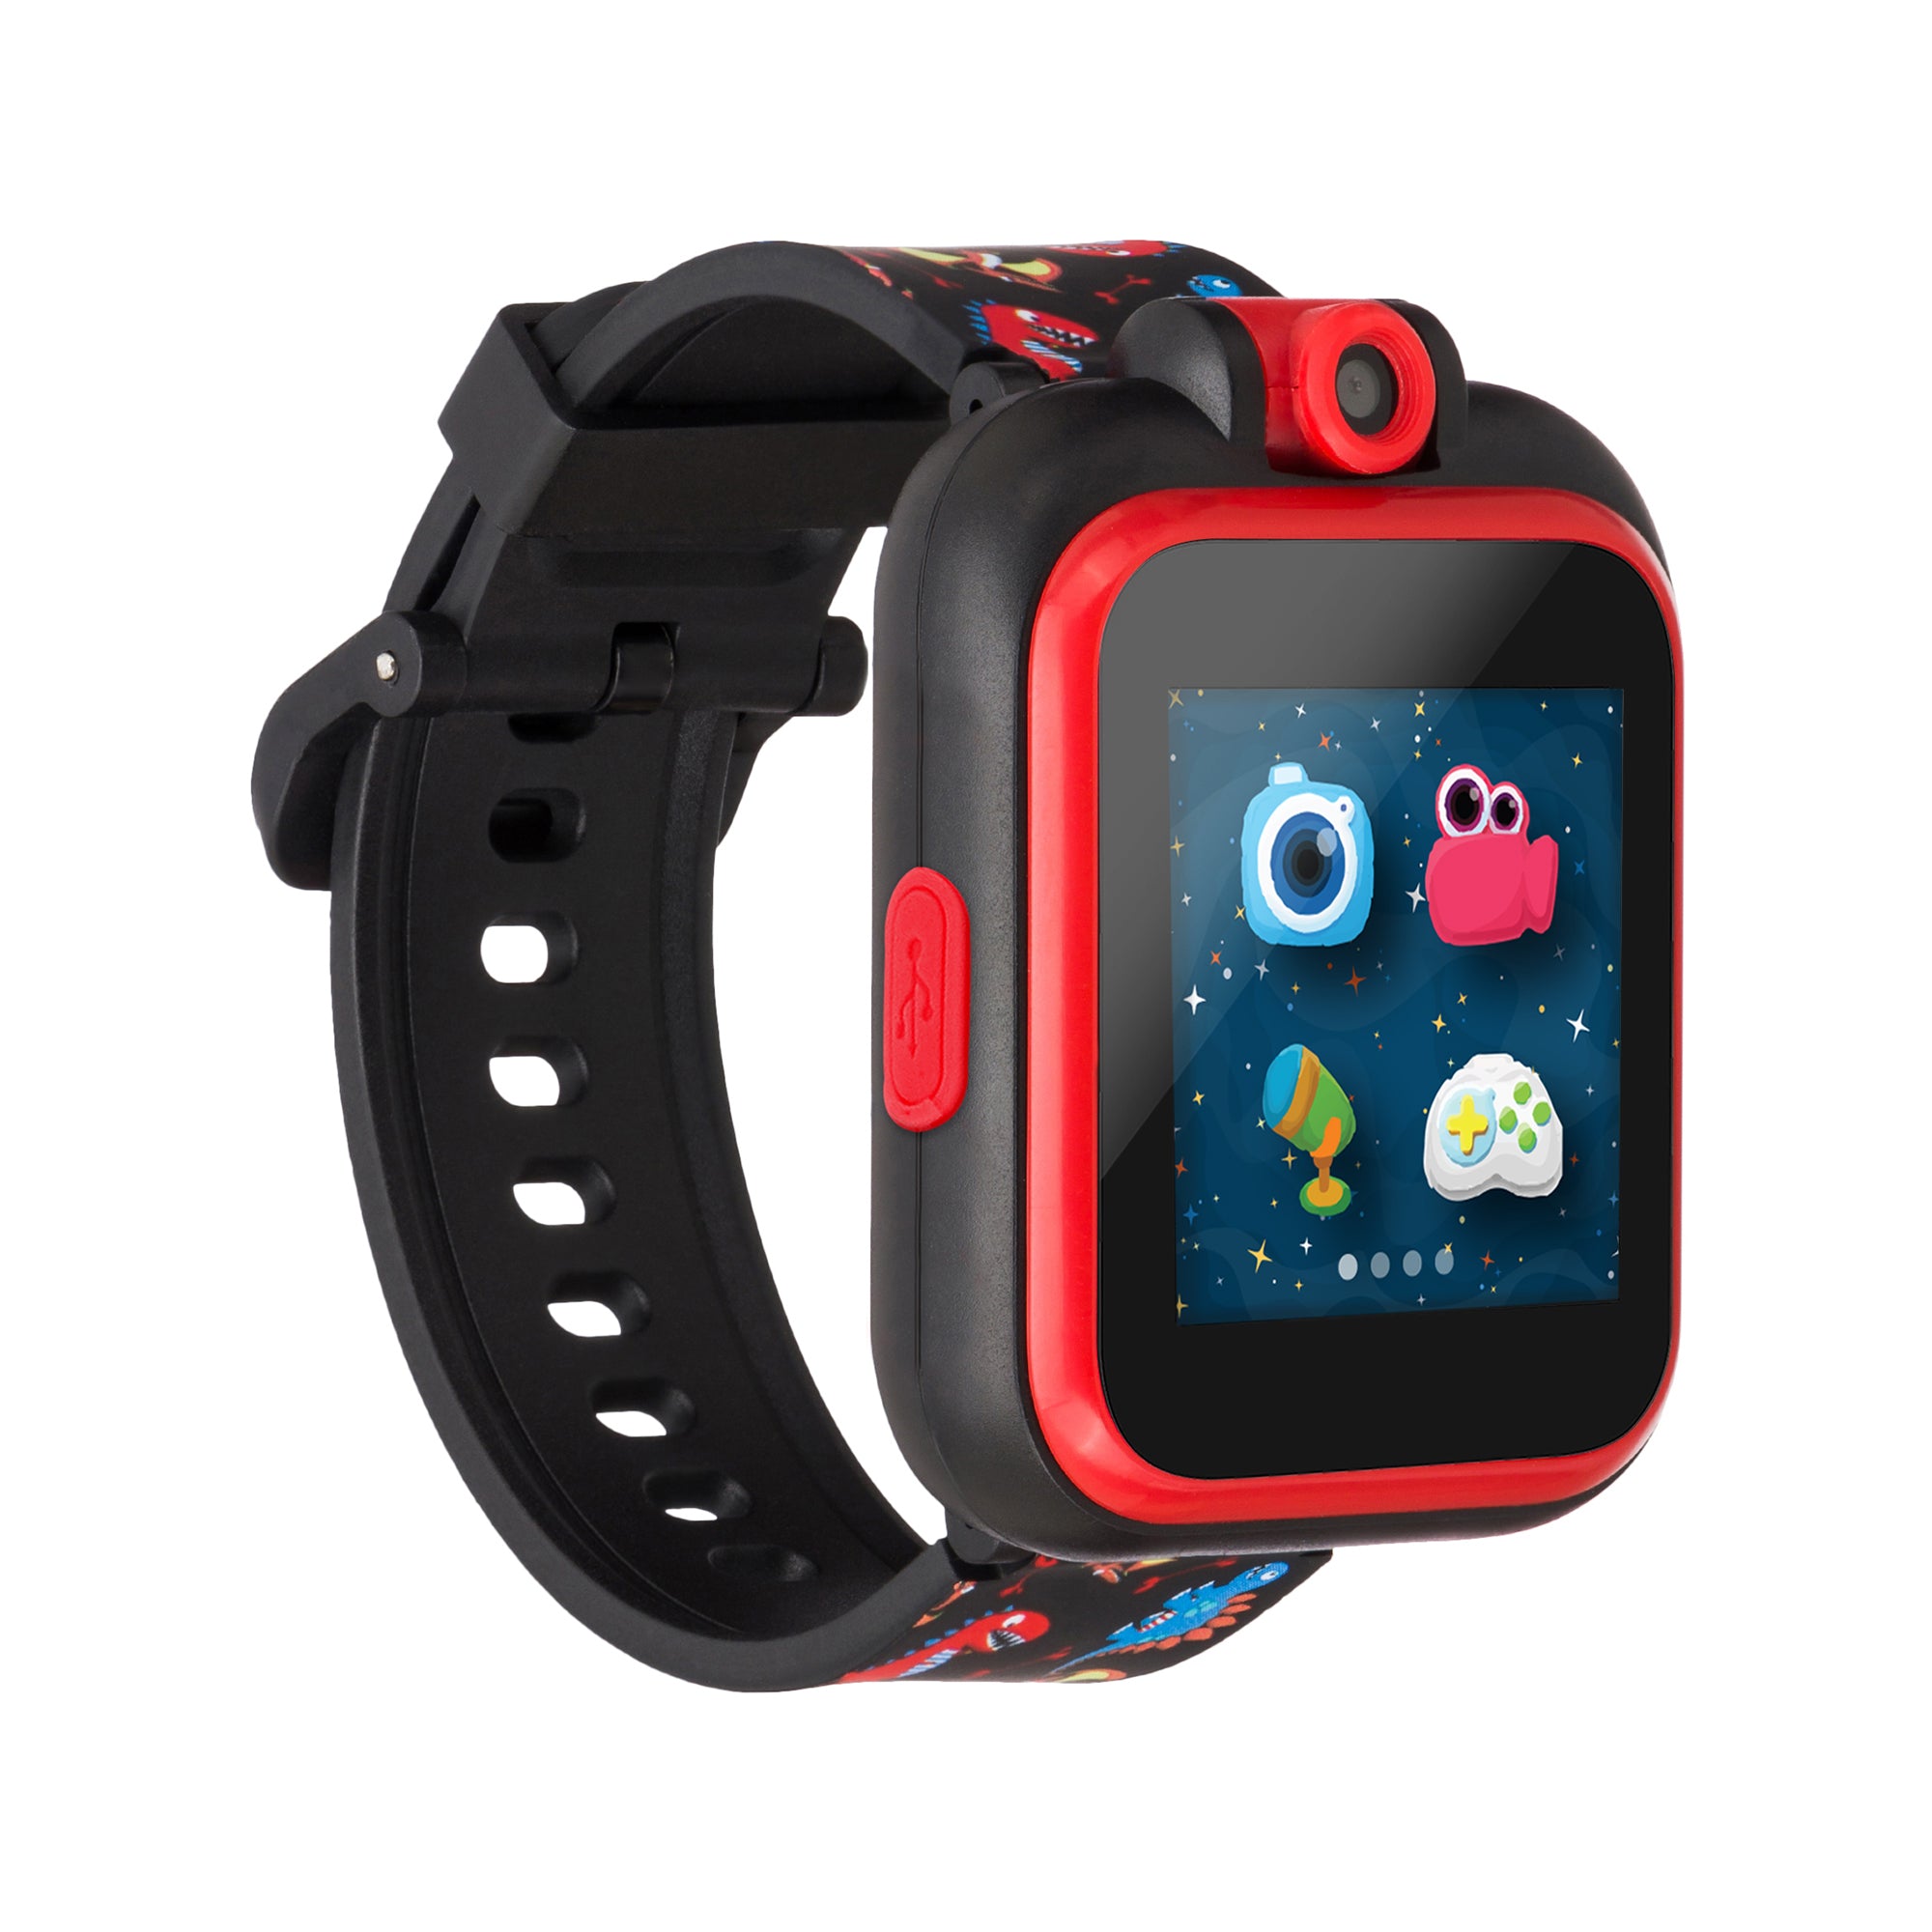 PlayZoom Smartwatch for Kids: Dinosaur Print affordable smart watch